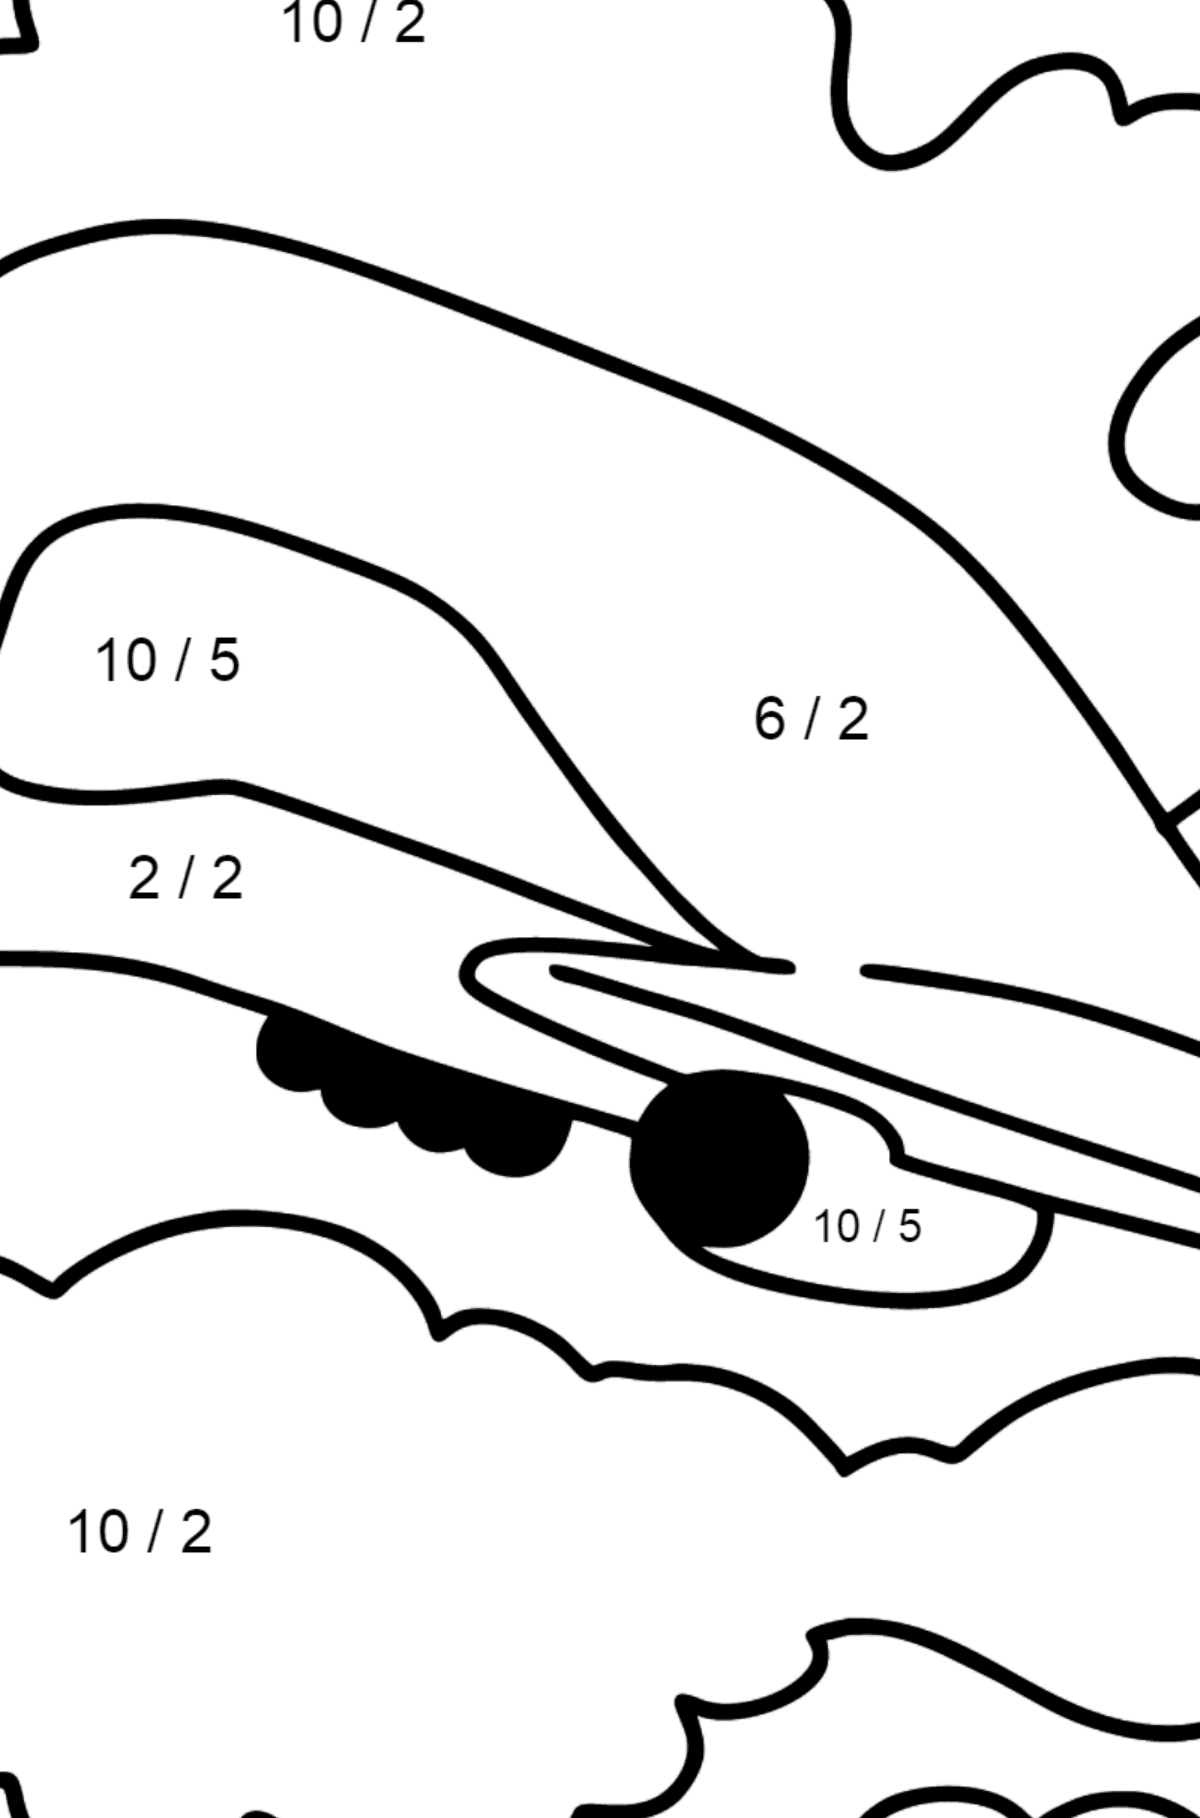 Cargo Plane coloring page - Math Coloring - Division for Kids